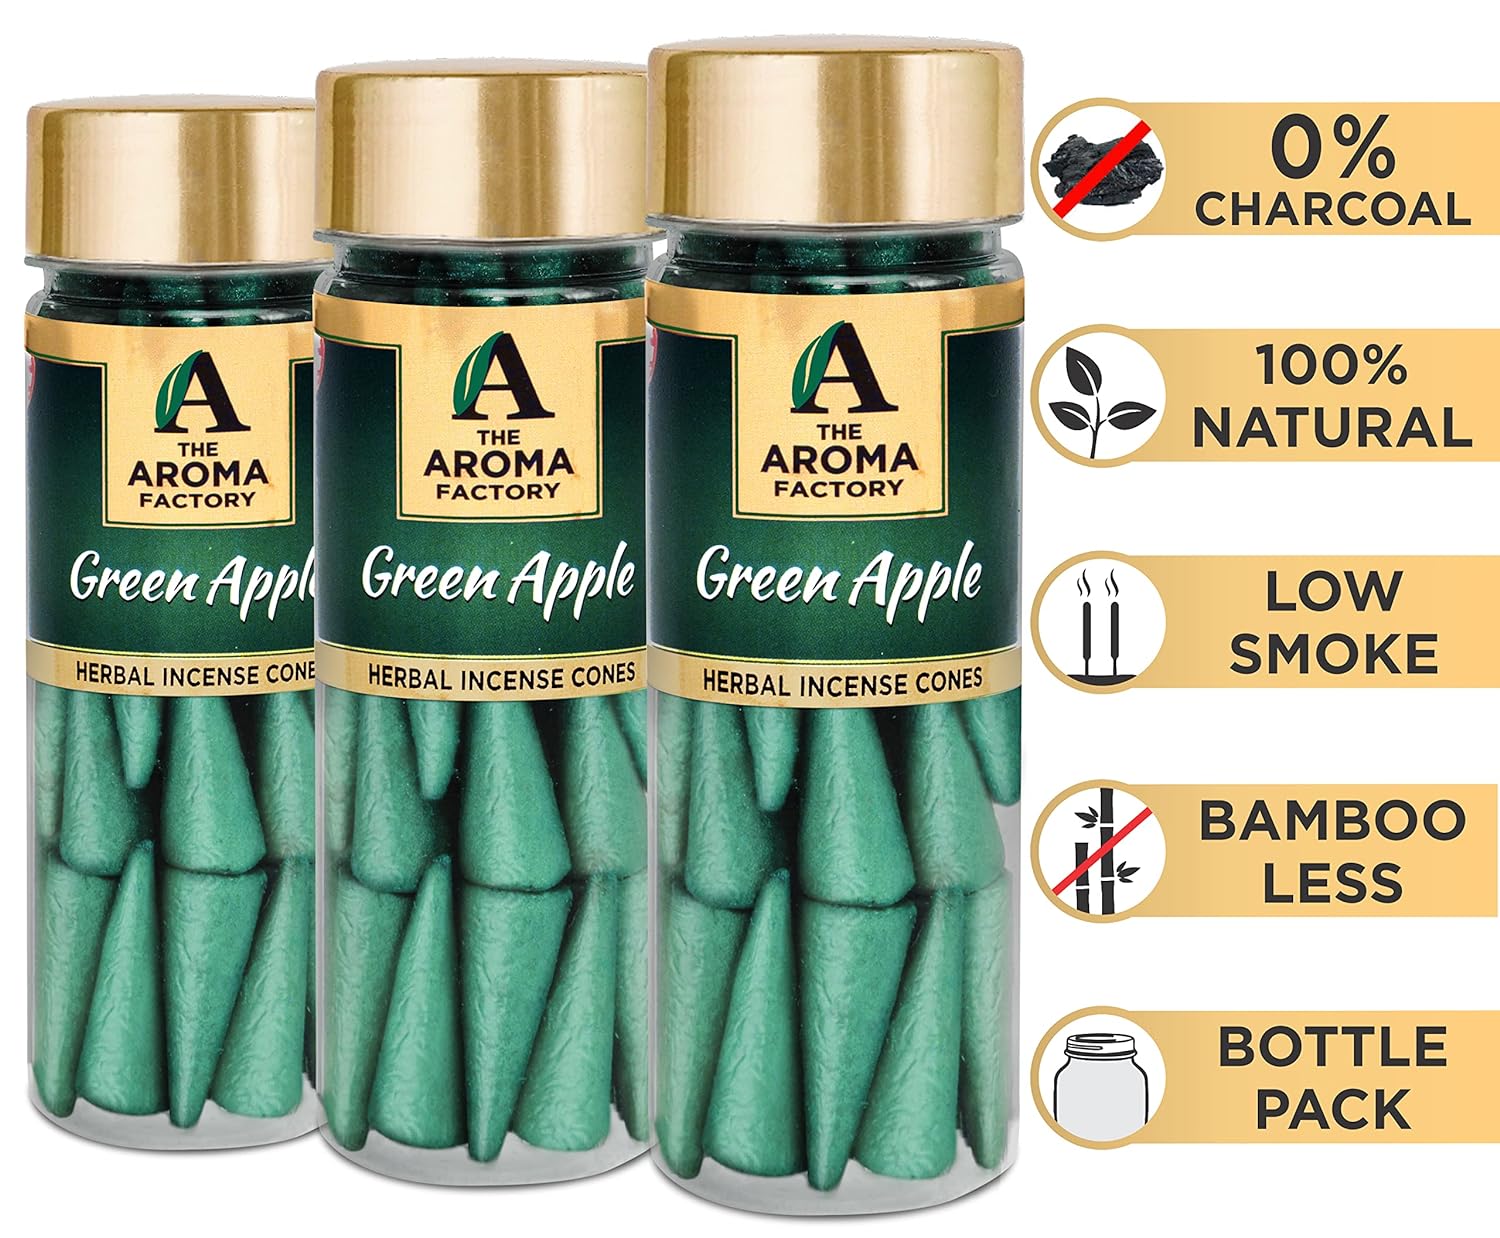 The Aroma Factory Incense Dhoop Cone, Green Apple (100% Herbal & 0% Charcoal) 3 Bottles x 30 Cones